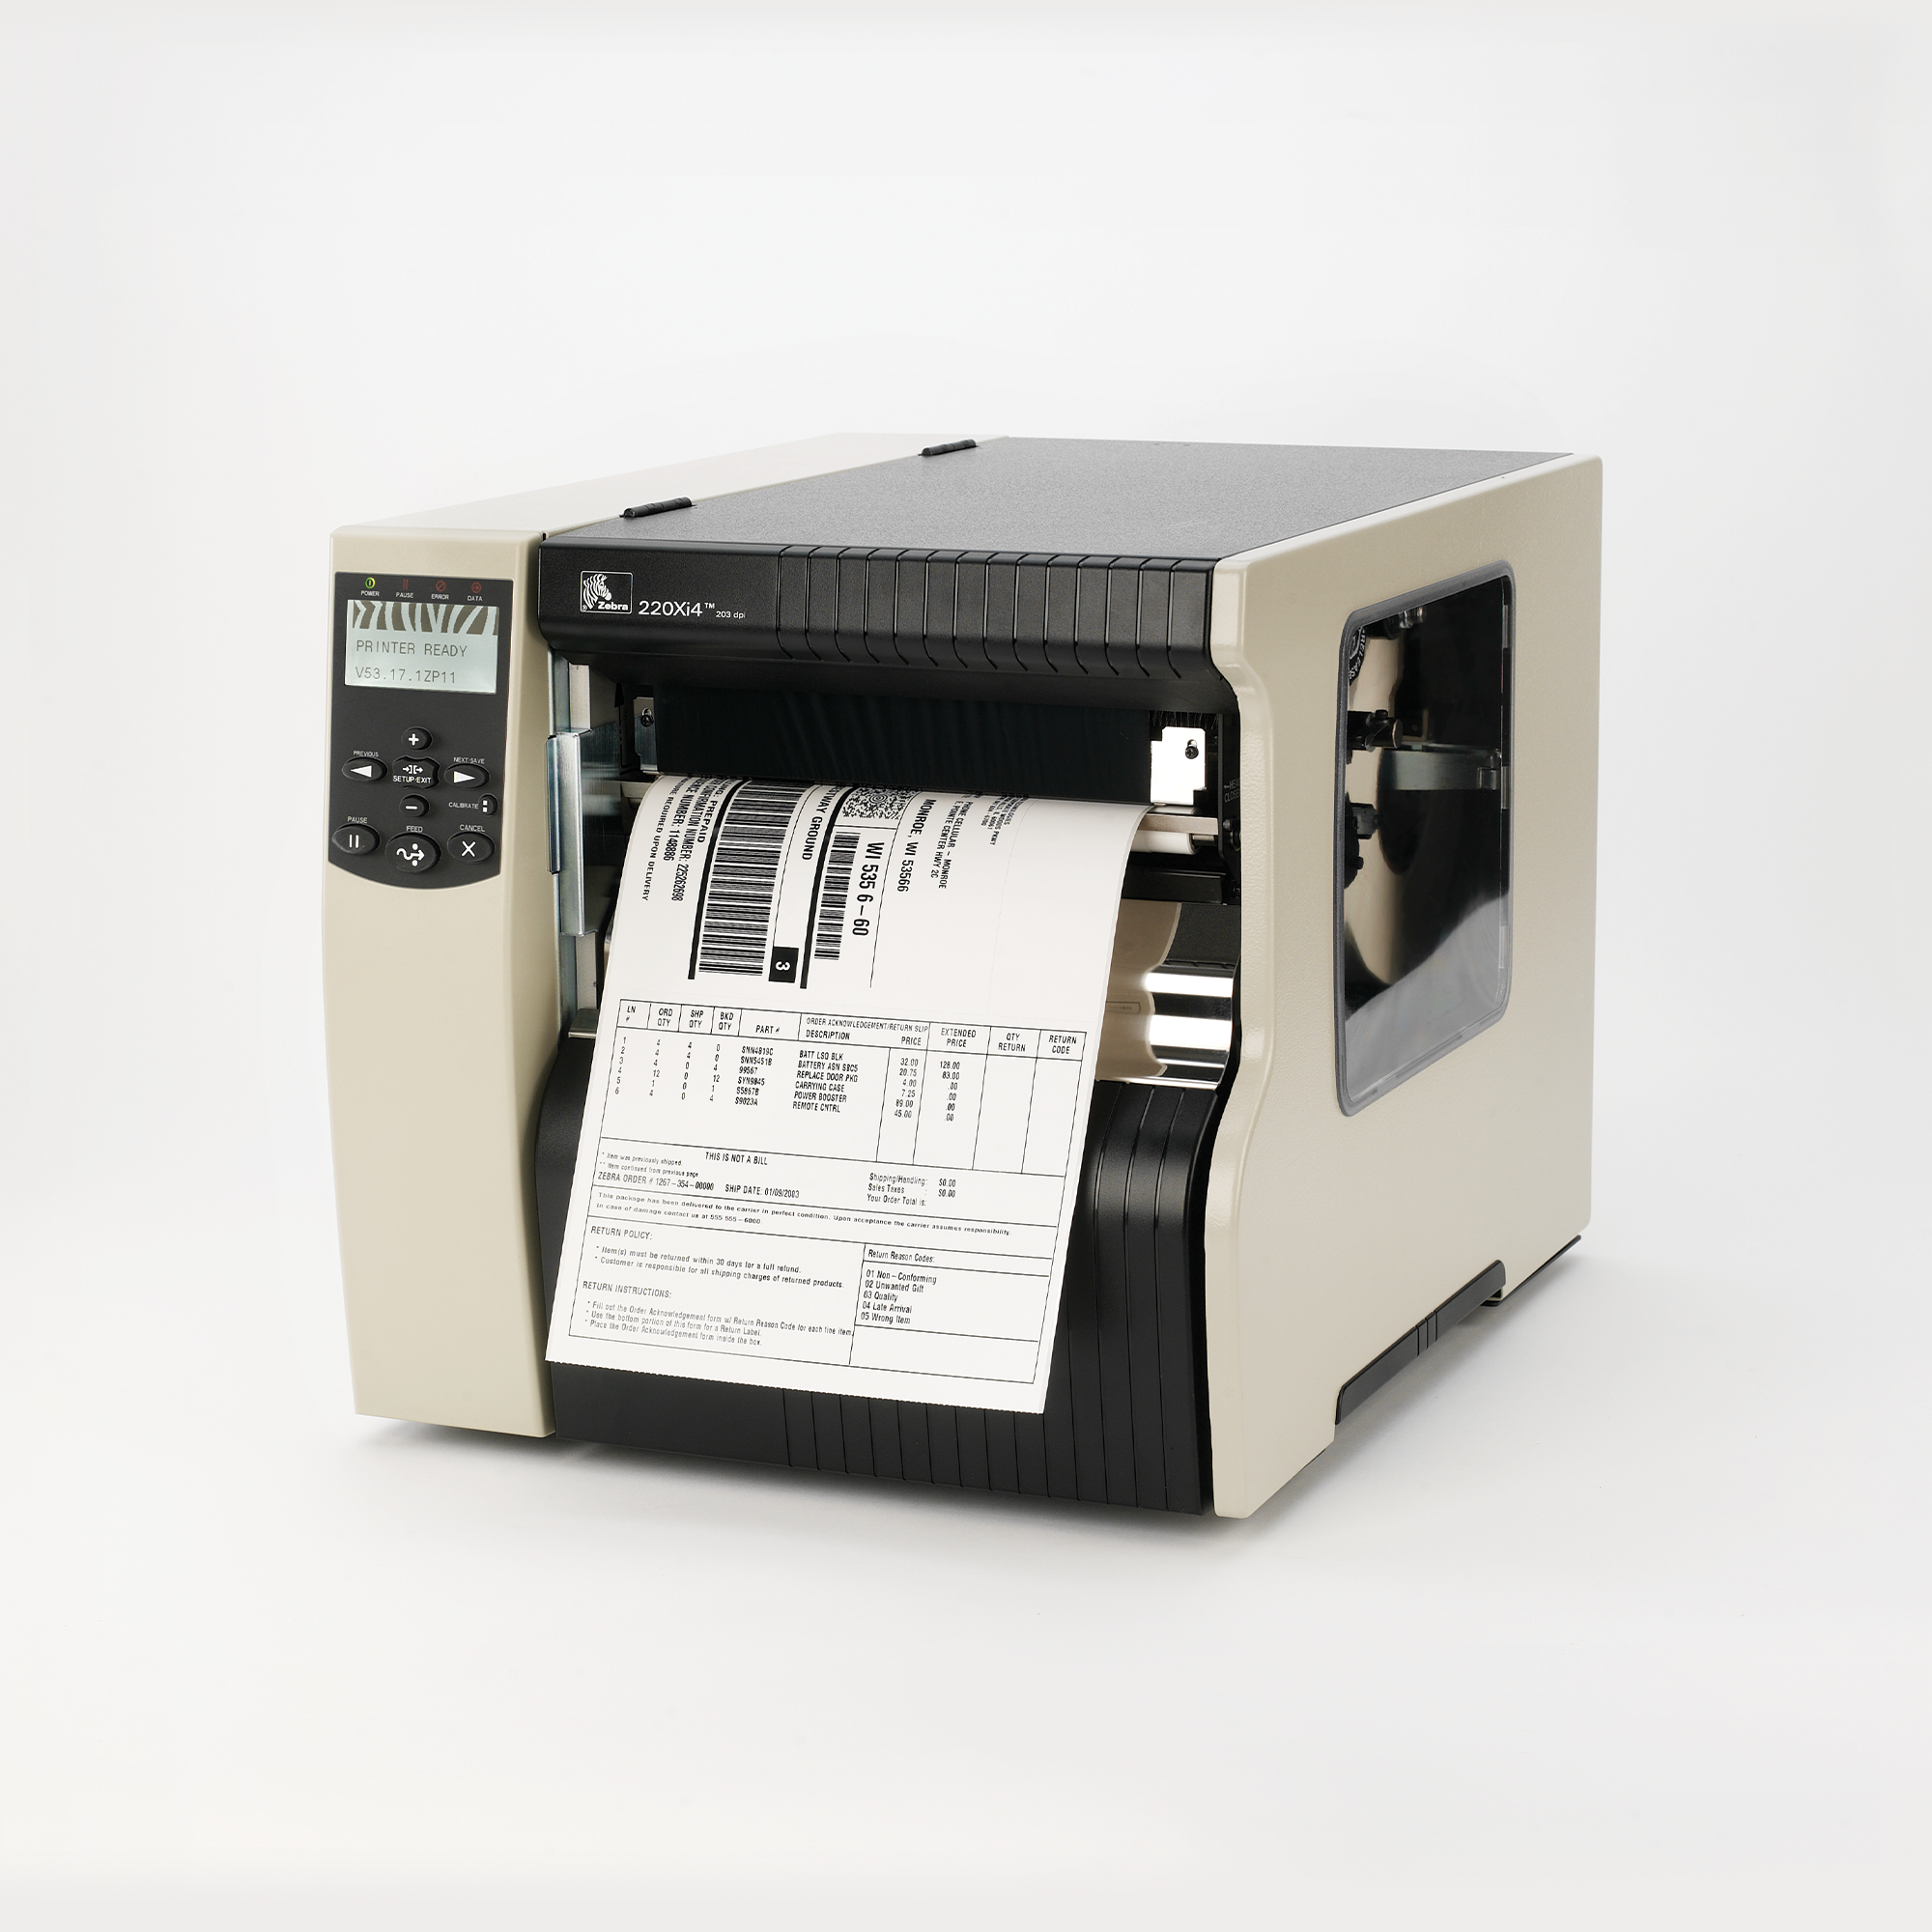 Zebra 220Xi4 Thermal Transfer Printer - 300dpi, US Cord, Serial, Parallel, USB, Int 10/100, Cutter with Catch Tray - MPN: 223-801-00100